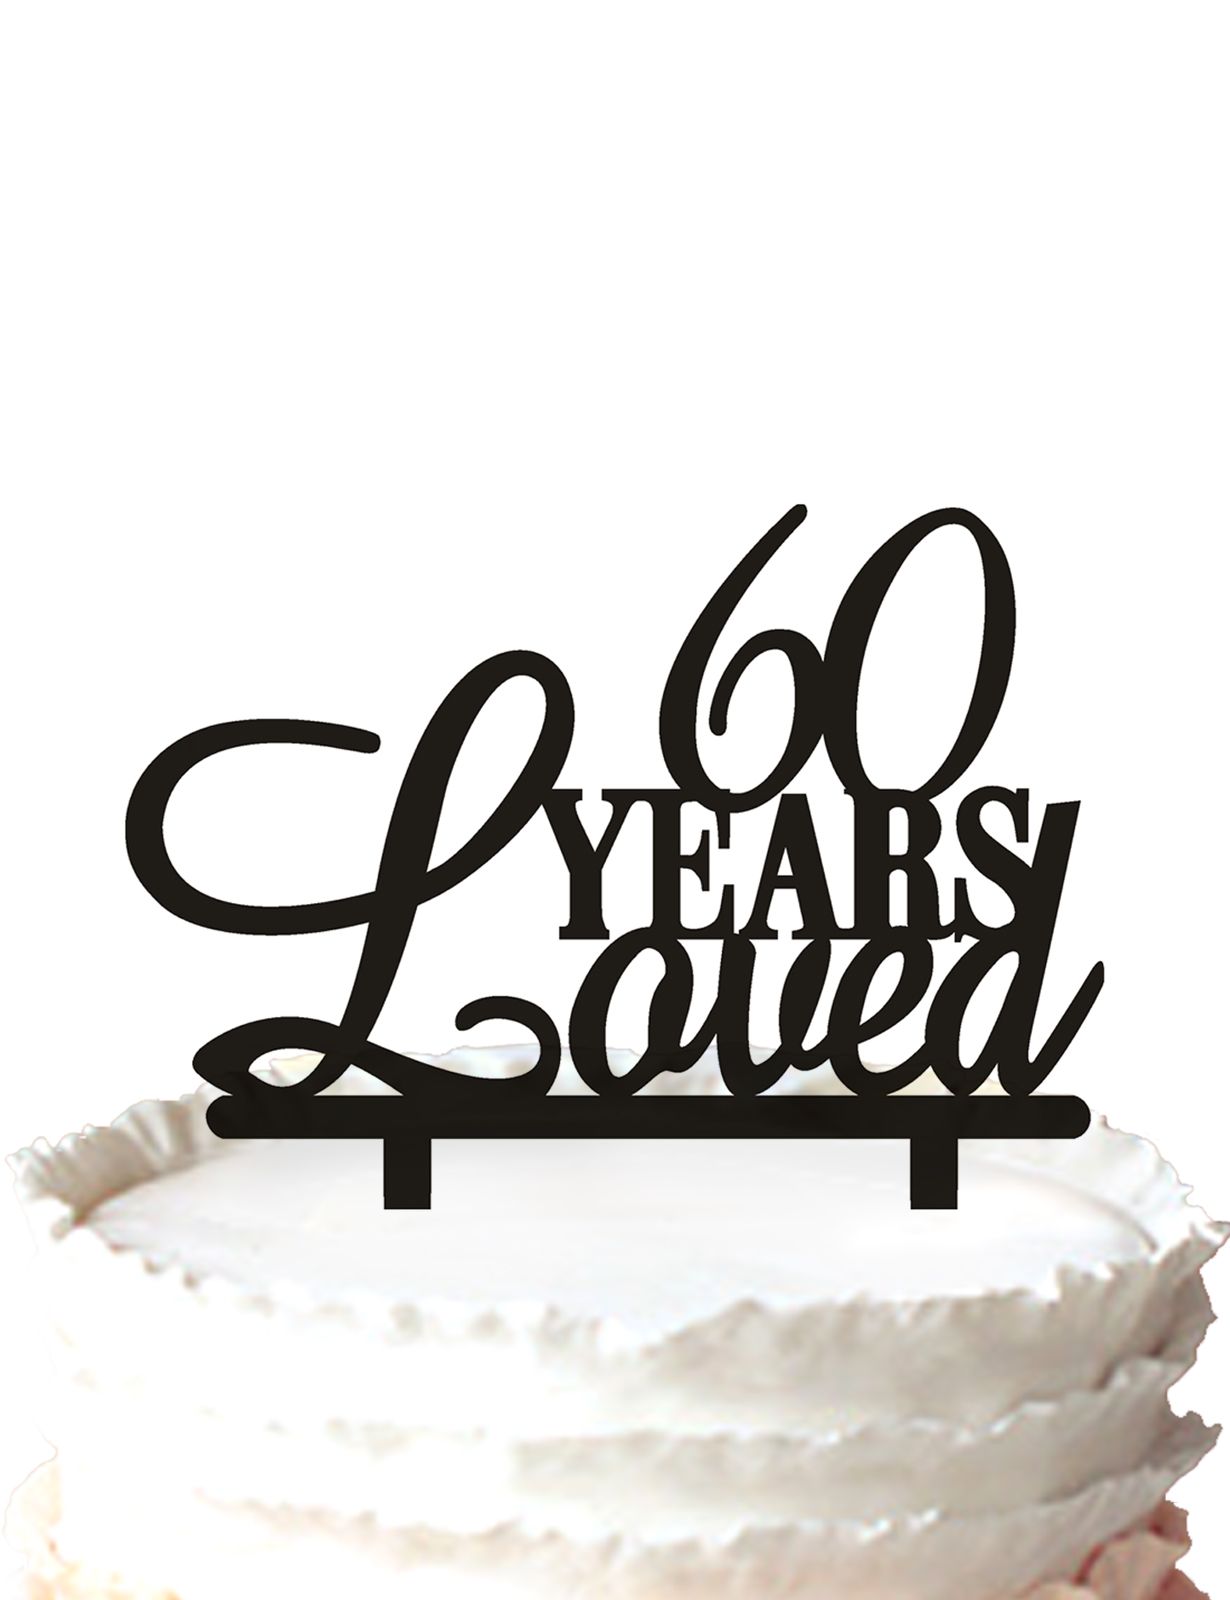 Made by OriginalCakeToppers "60 Years Loved" Black 60th Birthday Cake Topper 